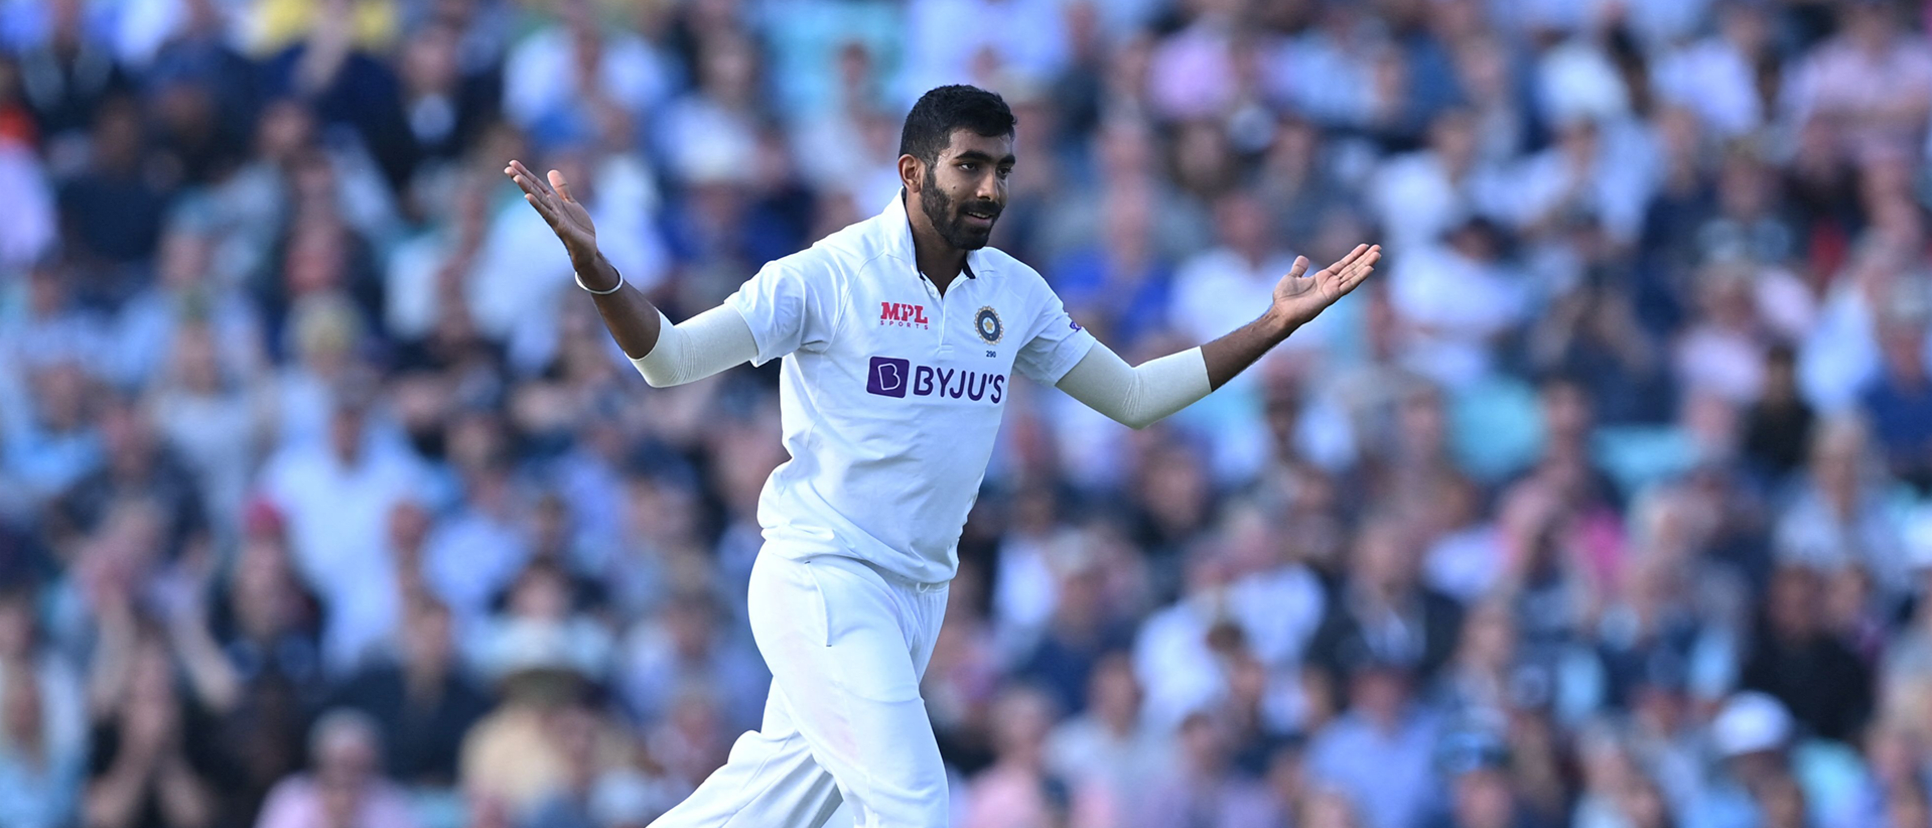 Bumrah turned the fourth Test